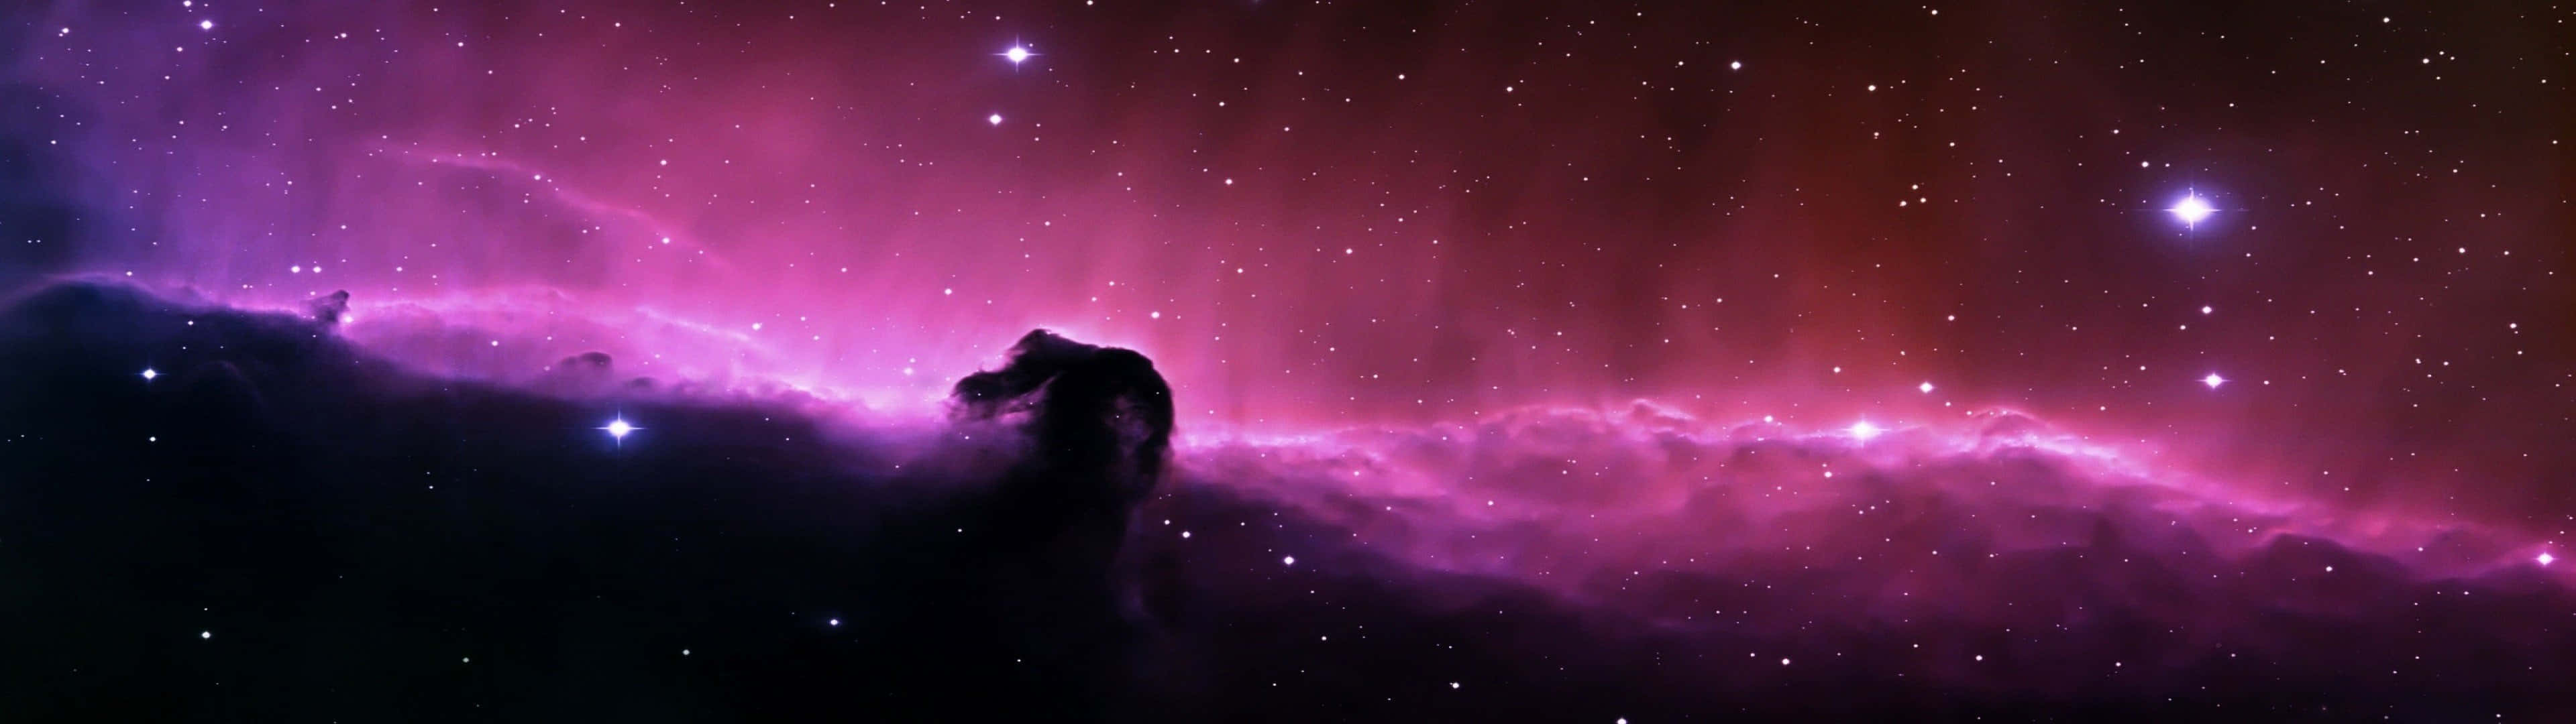 A Purple Nebula With Stars In The Background